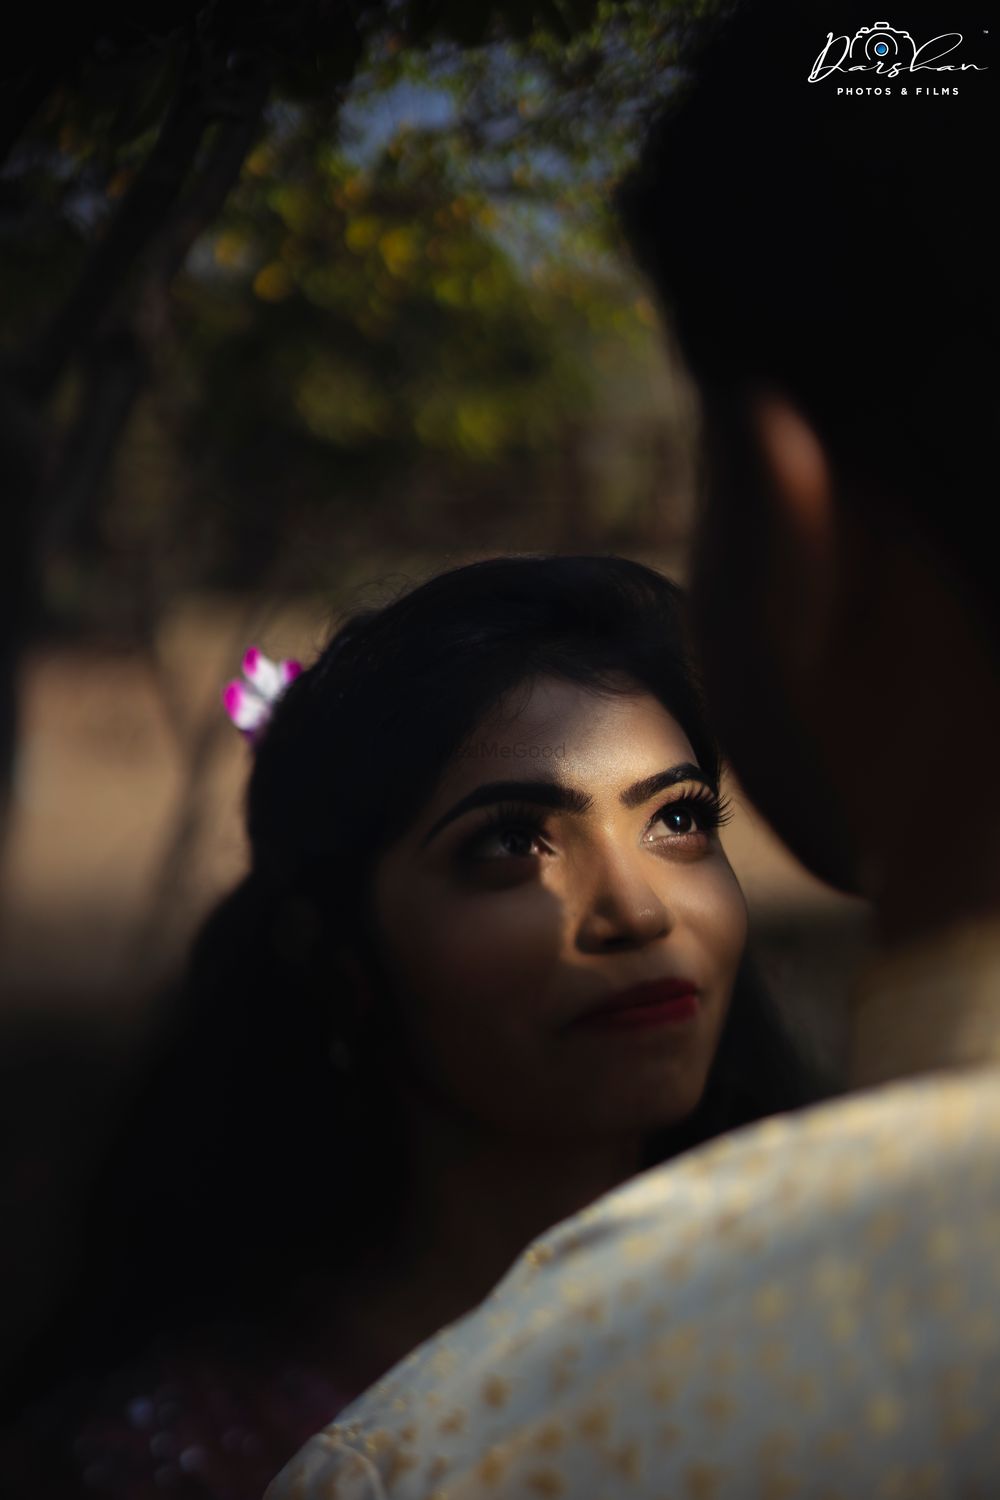 Photo By Darshan Photos and Movies - Pre Wedding Photographers